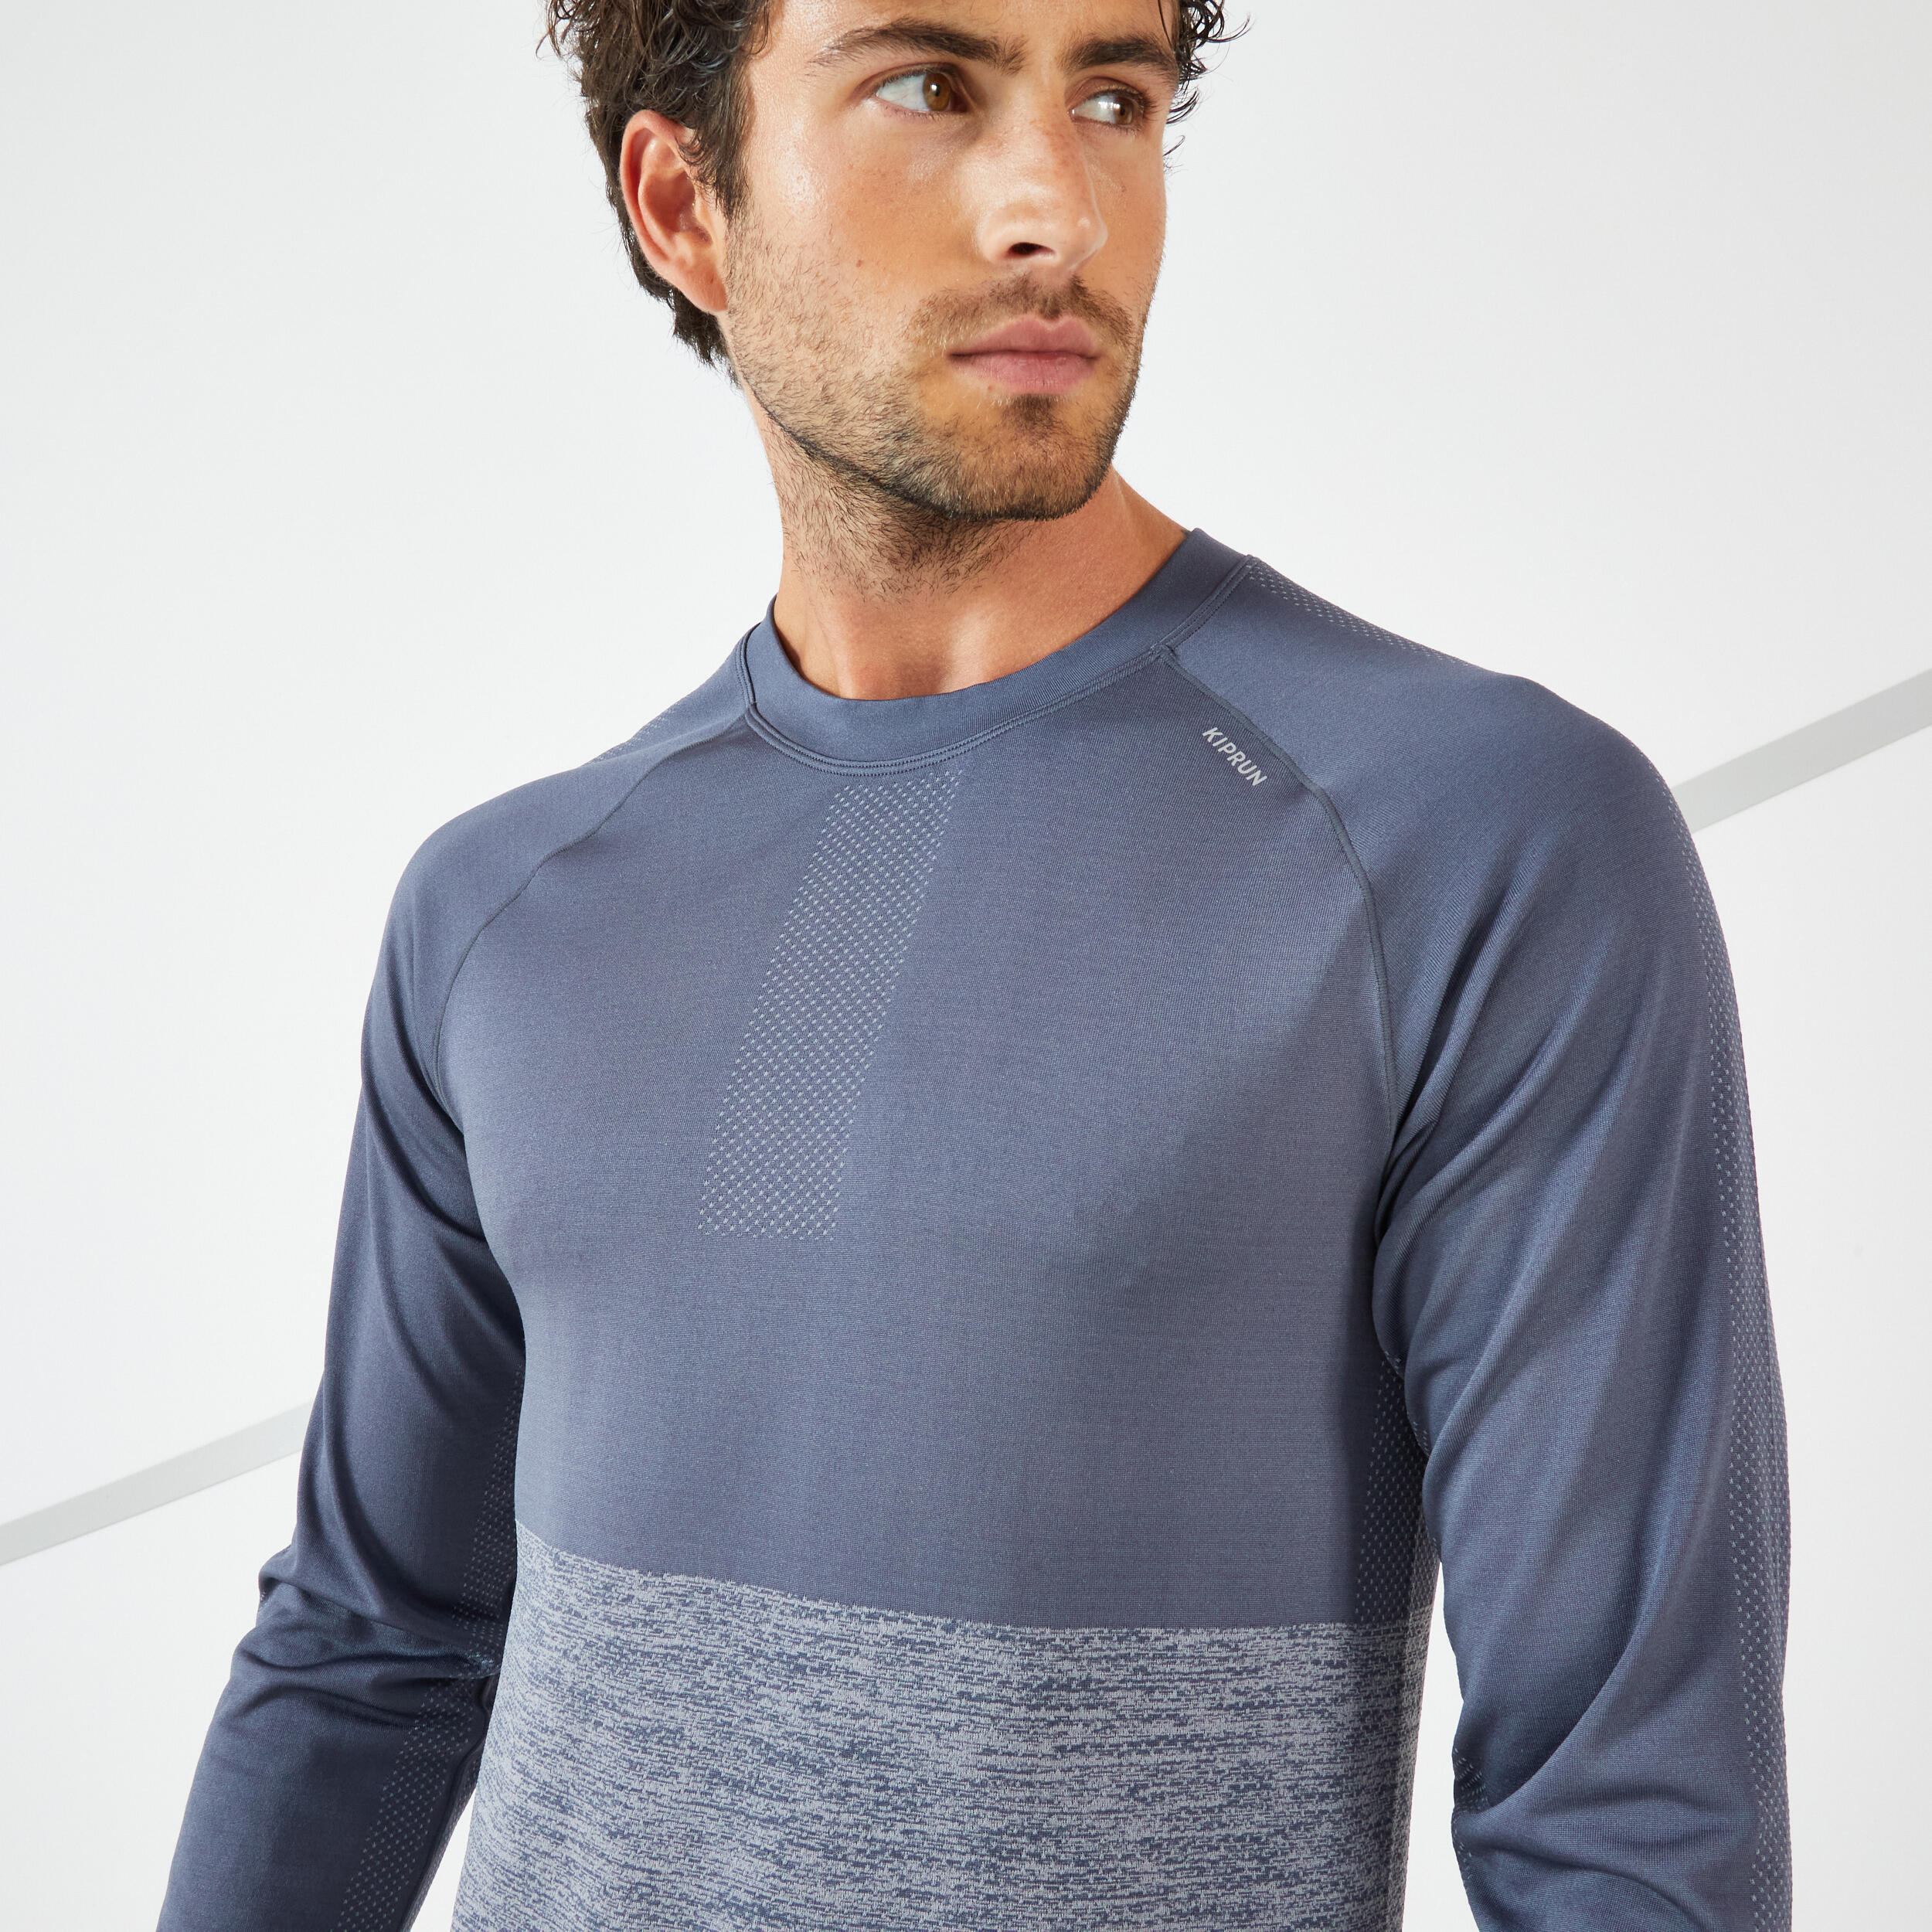 KIPRUN CARE MEN'S BREATHABLE LONG-SLEEVED RUNNING T-SHIRT - GREY LIMITED EDITION 4/9